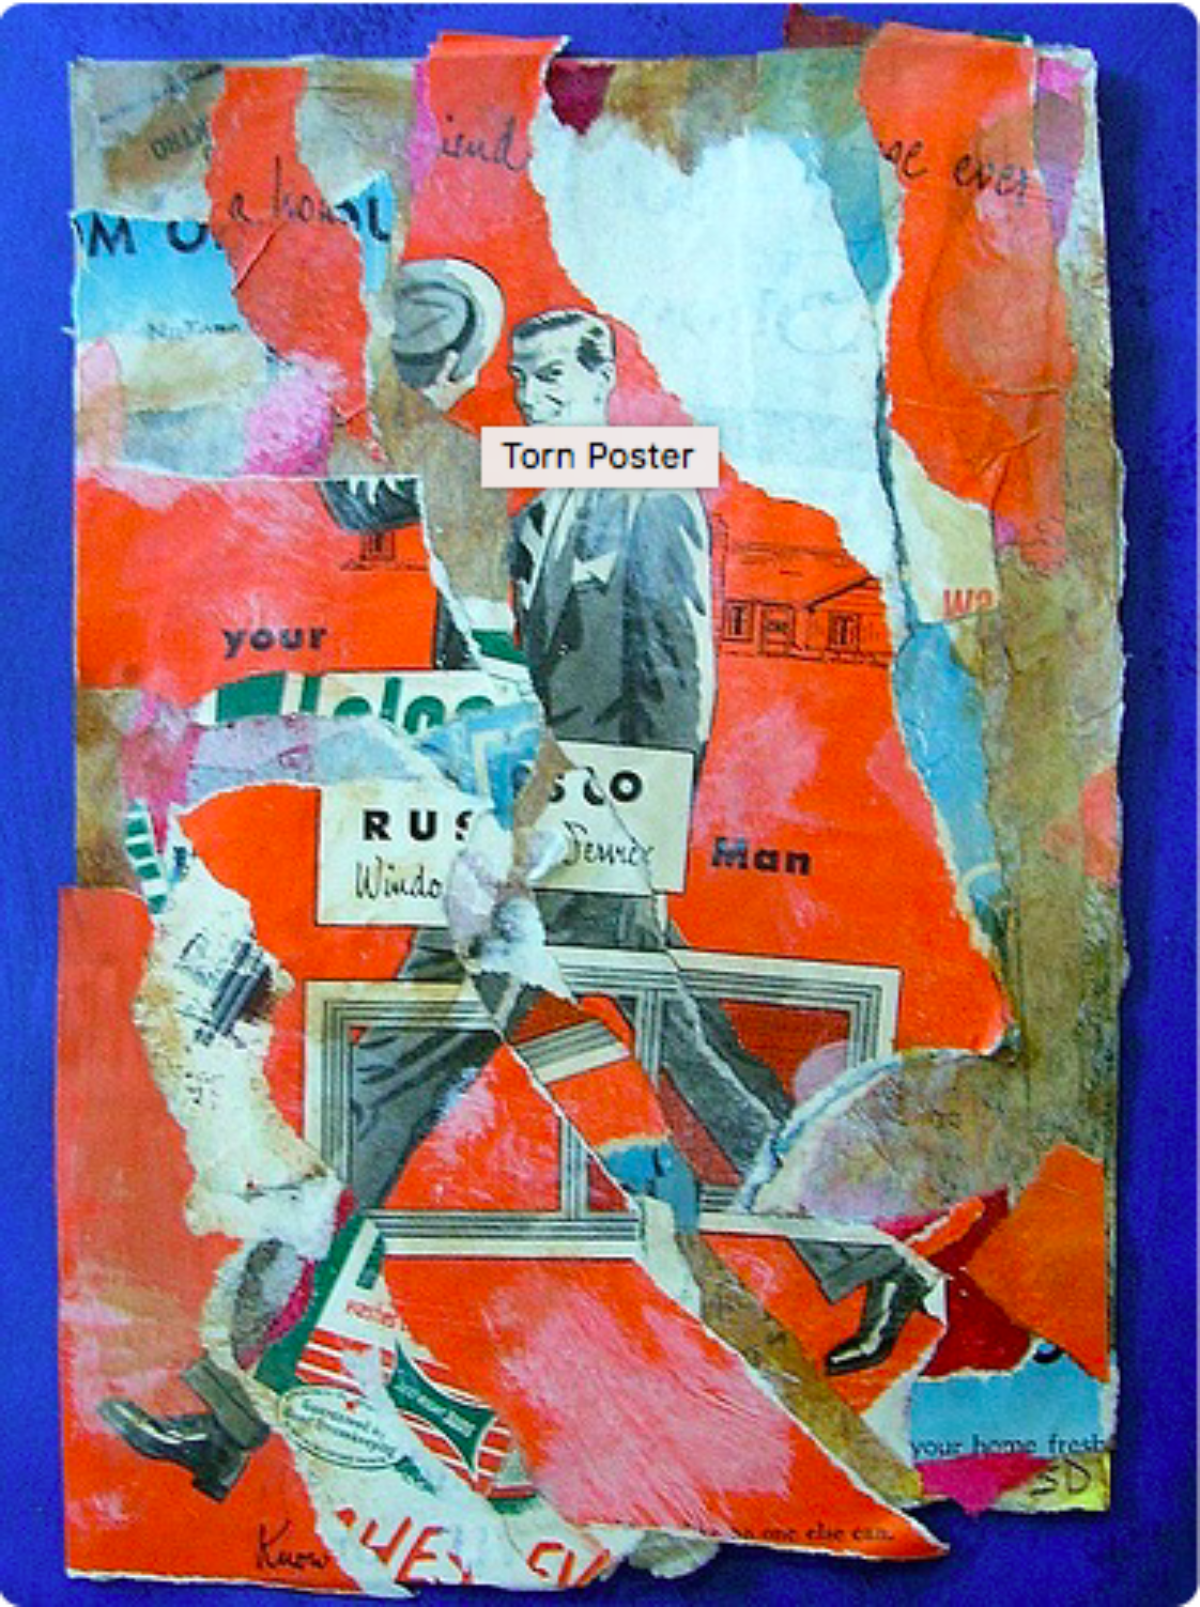 A collage poster of an illustrative man with a text of 